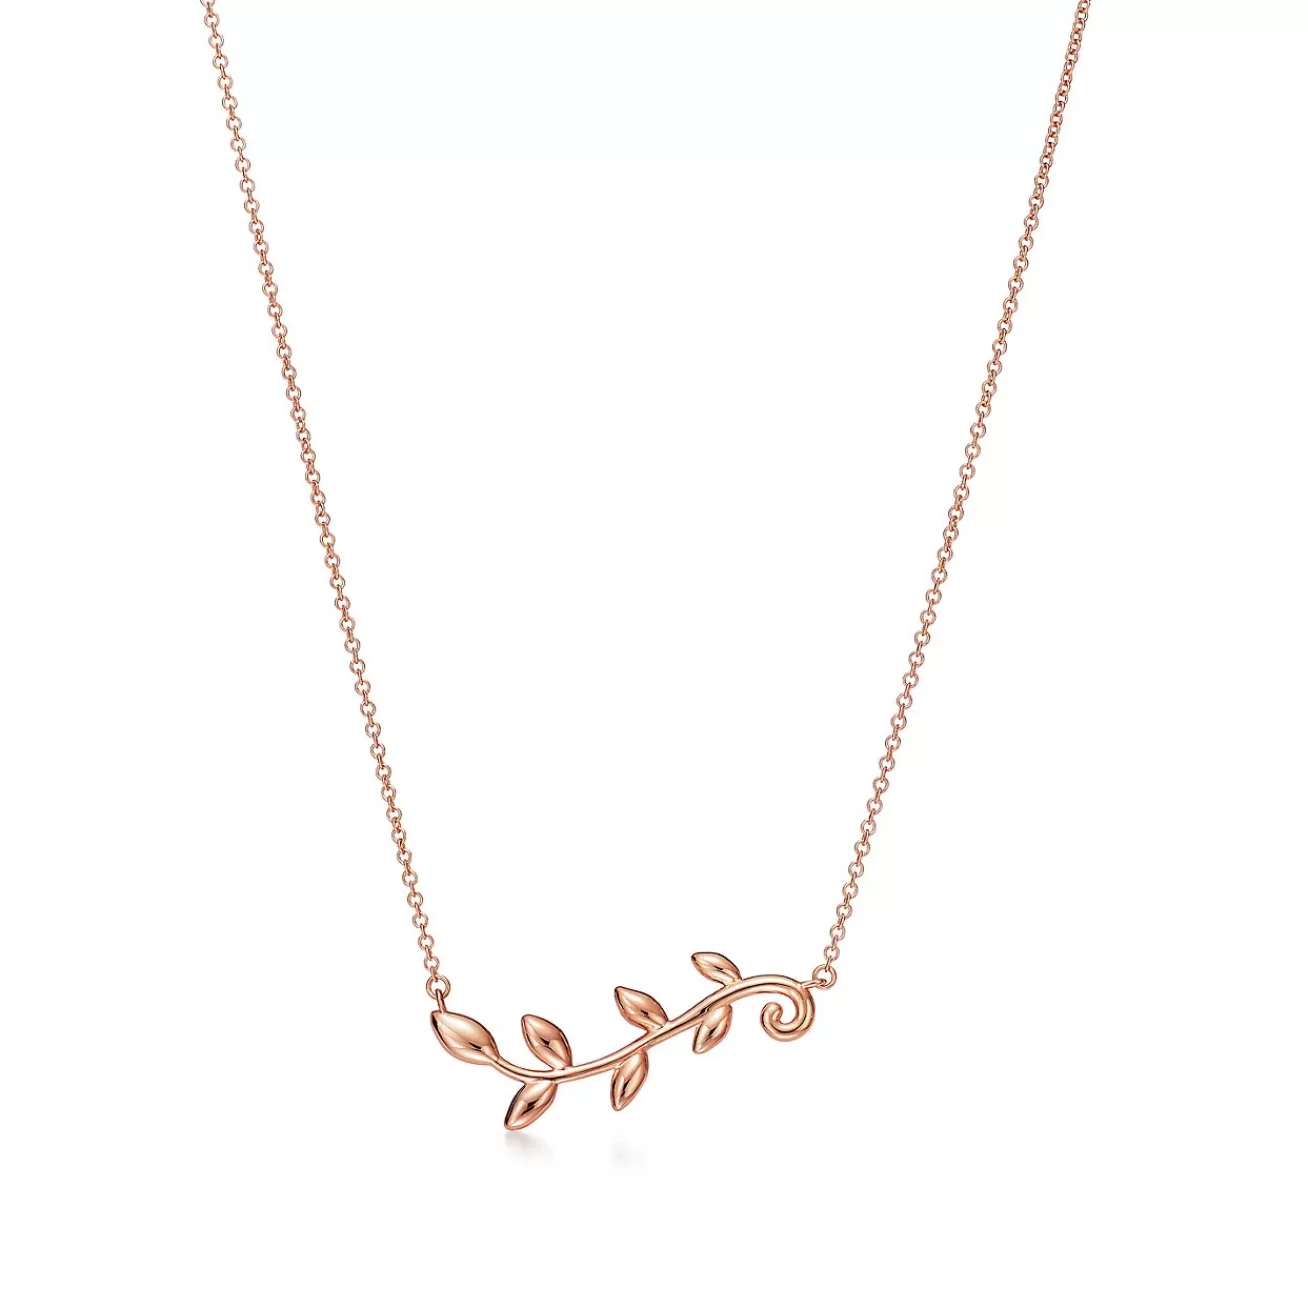 Tiffany & Co. Paloma Picasso® Olive Leaf vine pendant in 18k rose gold. | ^ Necklaces & Pendants | Rose Gold Jewelry